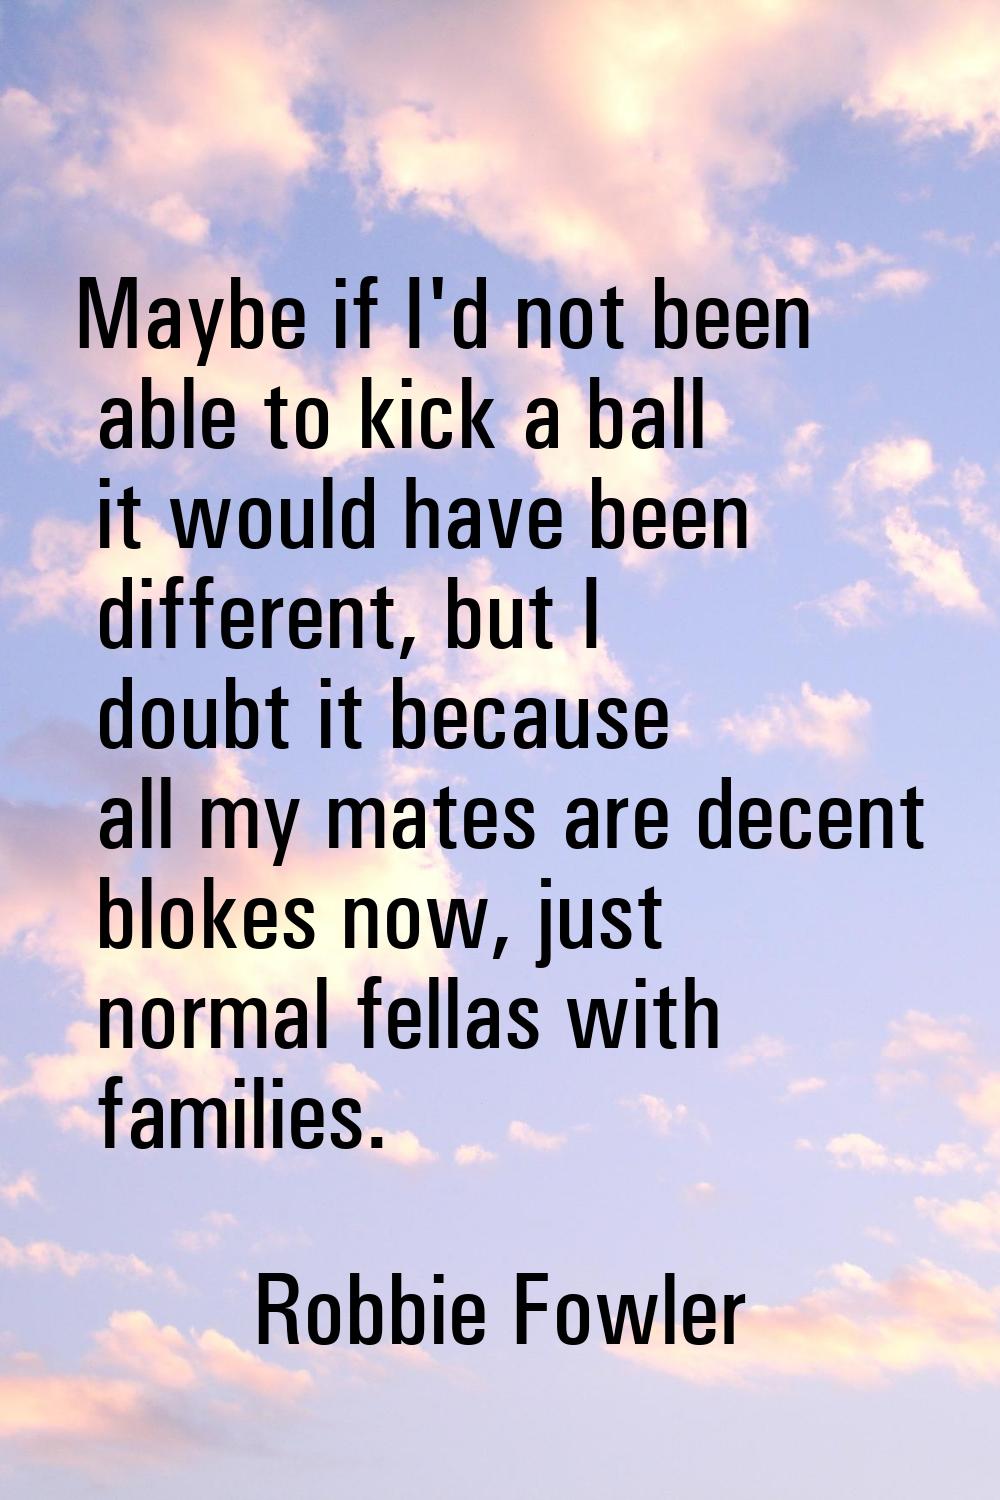 Maybe if I'd not been able to kick a ball it would have been different, but I doubt it because all 